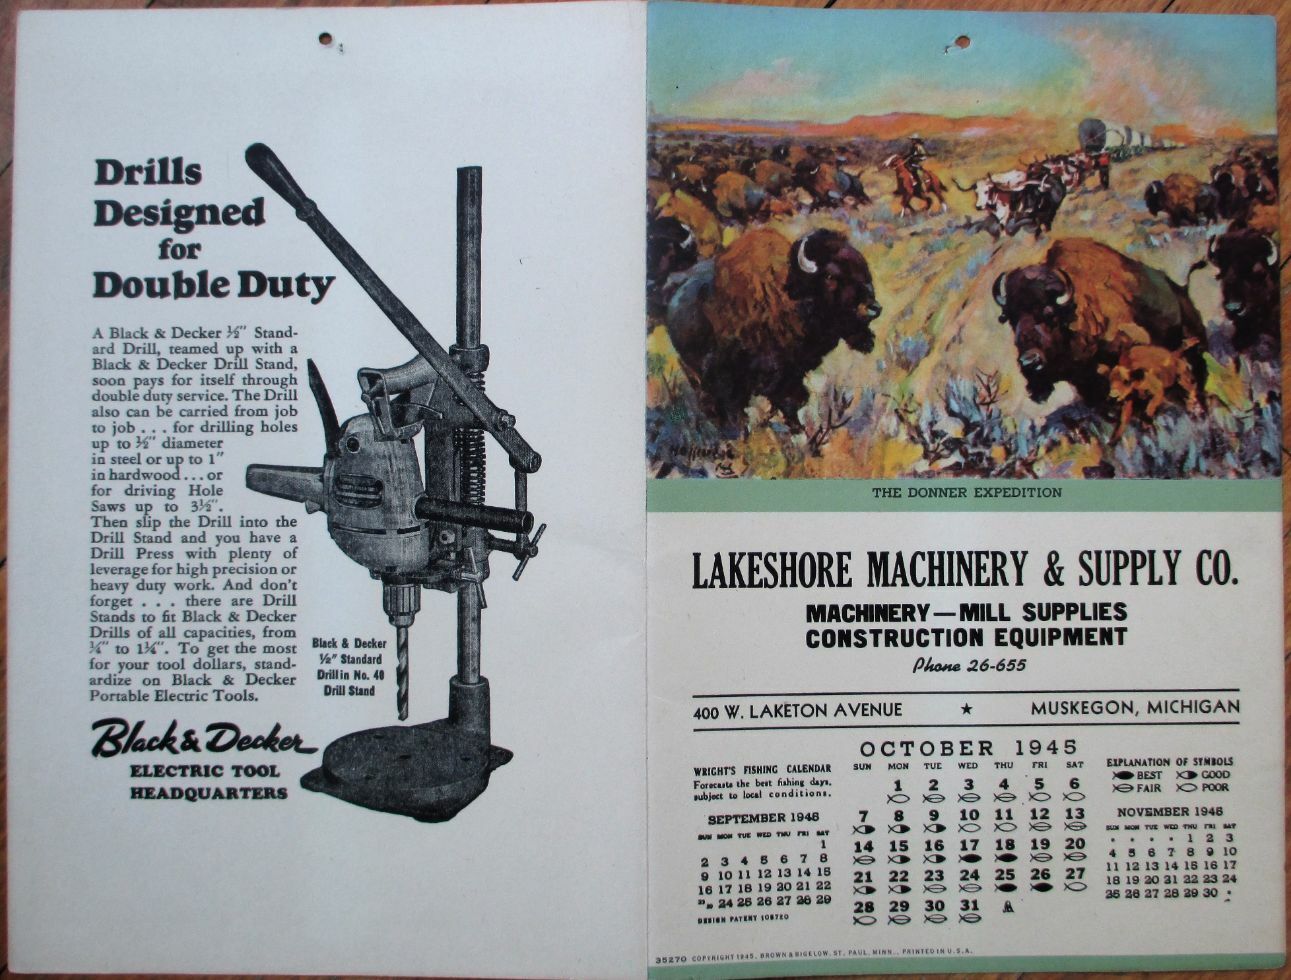 Cowboy/Western 1945 Advertising Calendar: The Donner Expedition - Muskegon, MI